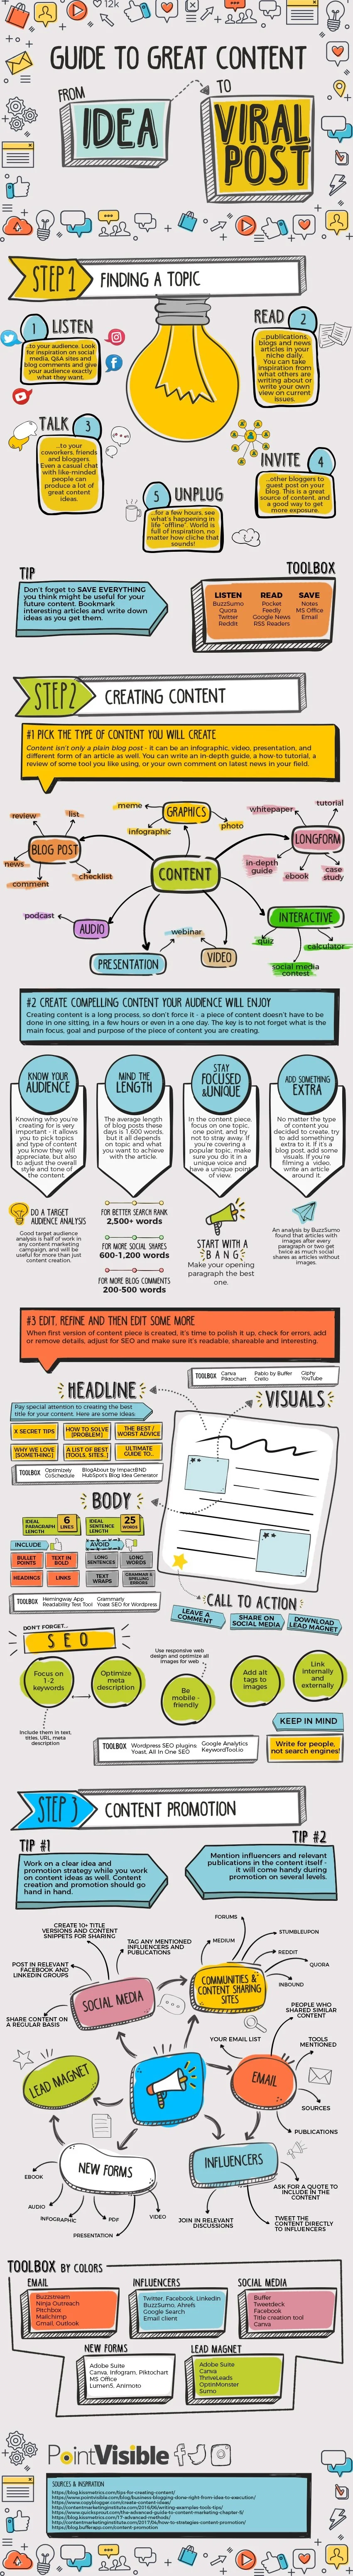 A Roadmap To Great Content – From Idea To Viral Post - #infographic